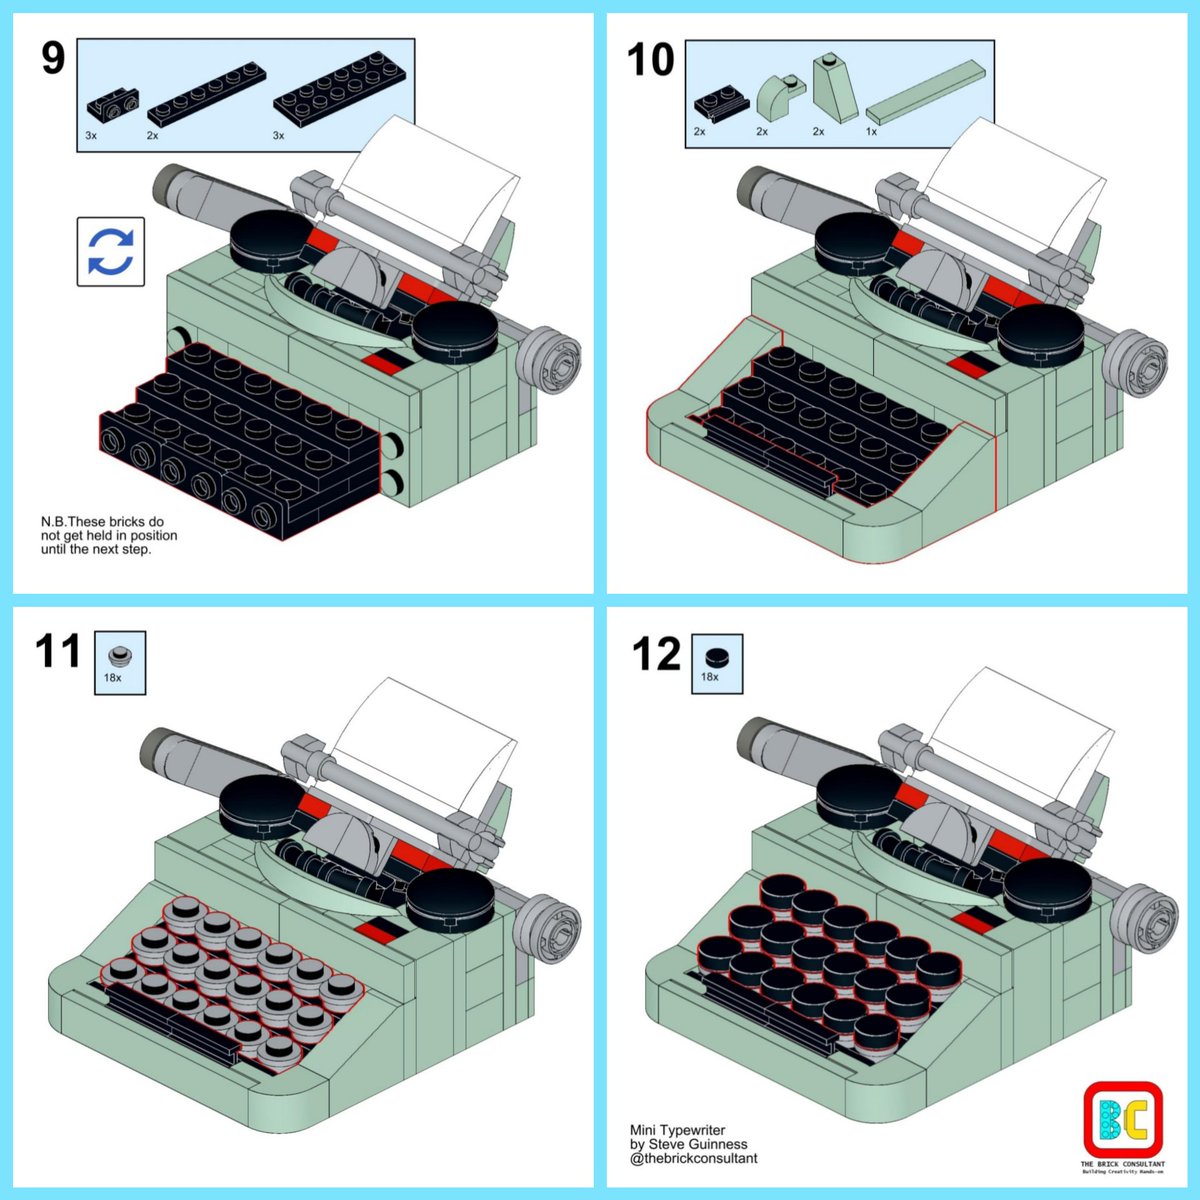 I'm having fun designing these mini builds, so have plans for a few more. Of course I couldn't resist designing a new version of my LEGO Ideas Typewriter #LEGO #LEGO90years #rebuildtheworld #legofan #AFOL #free #Instructions #classic #legomoc #legotutorial #typewriter #microscale